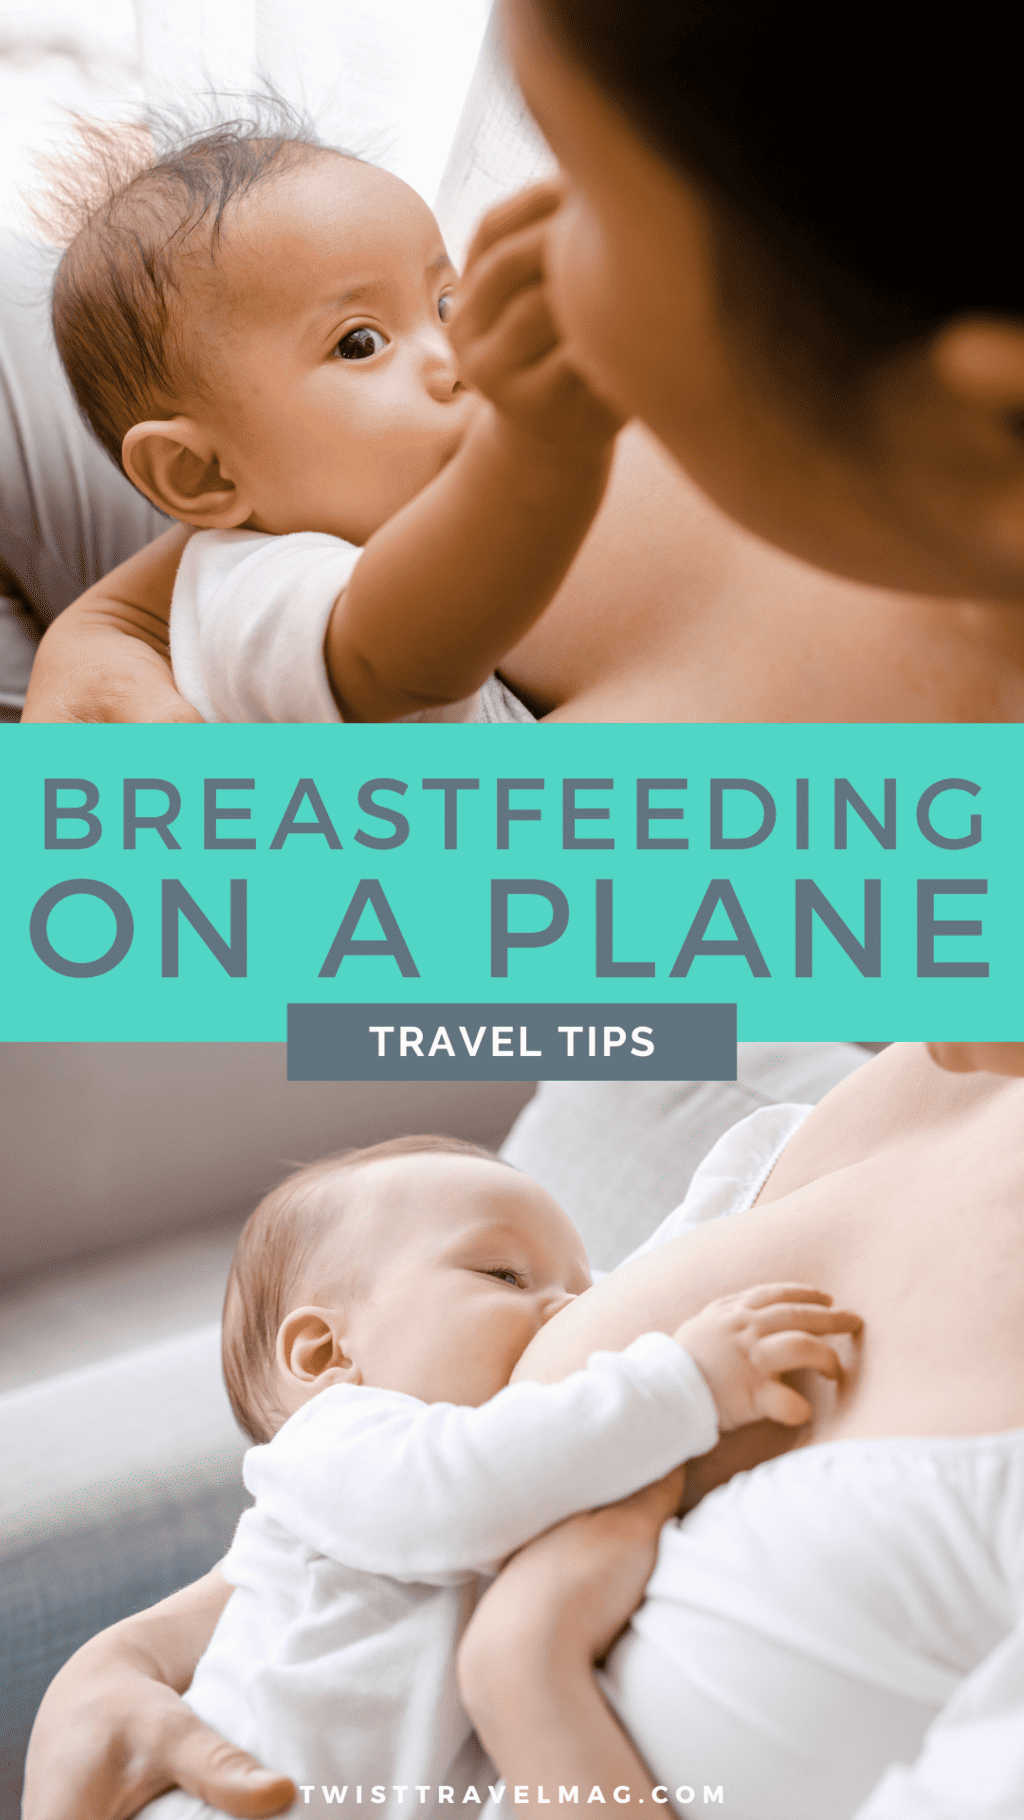 How to Breastfeed on a plane